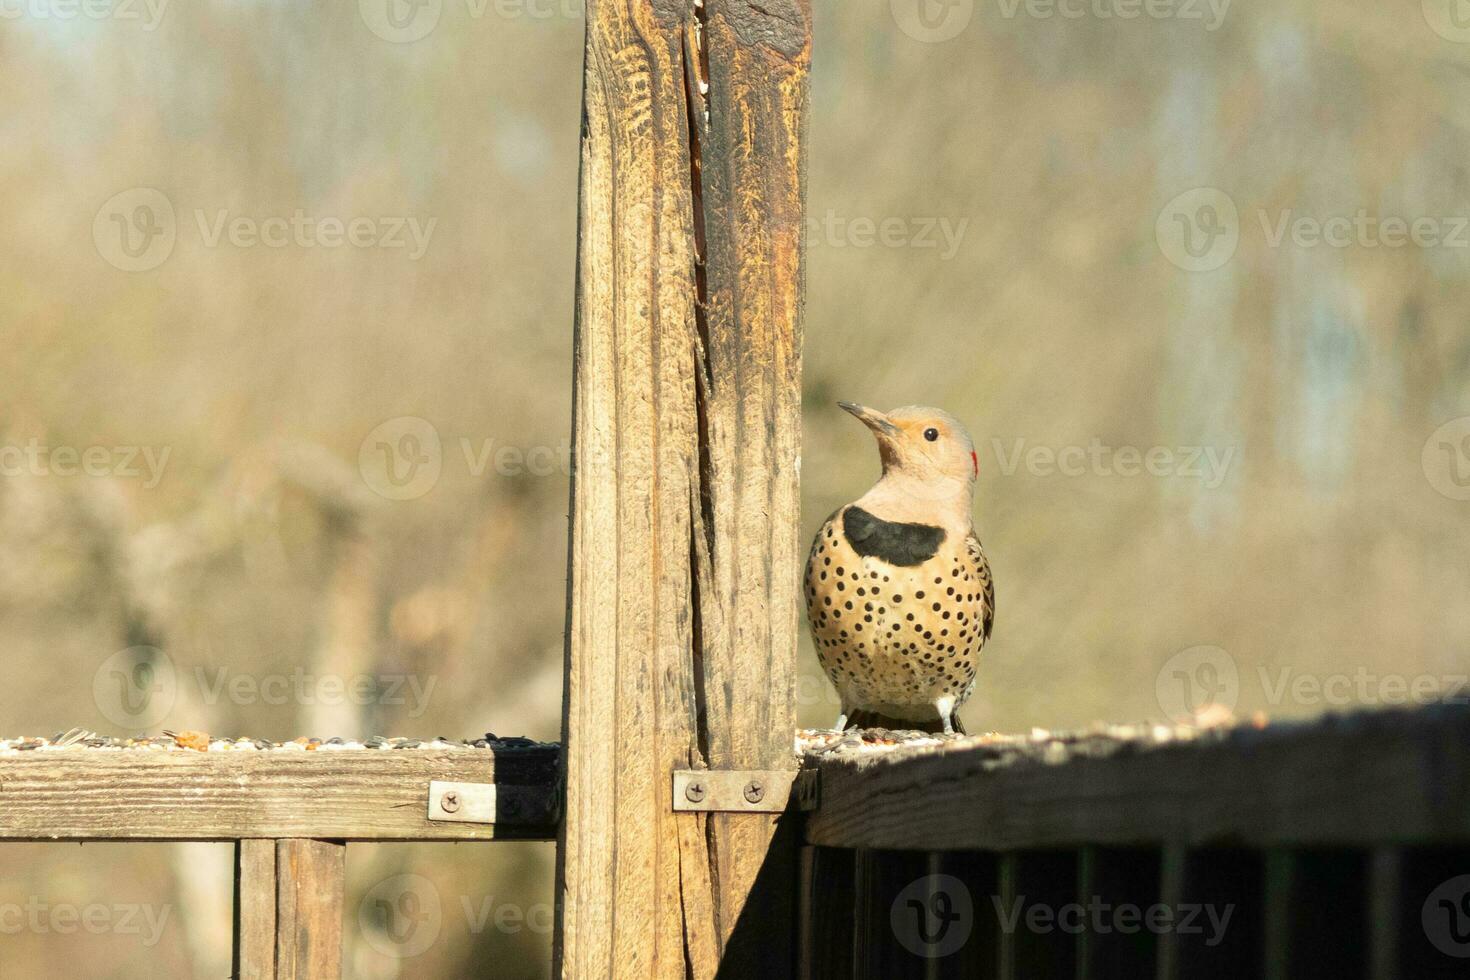 Northern flicker posing on the railing. His chest puffed out and looking stoic. His gold plumage with black speckles helps for camouflage. The little black bib stands out. This is a large woodpecker. photo